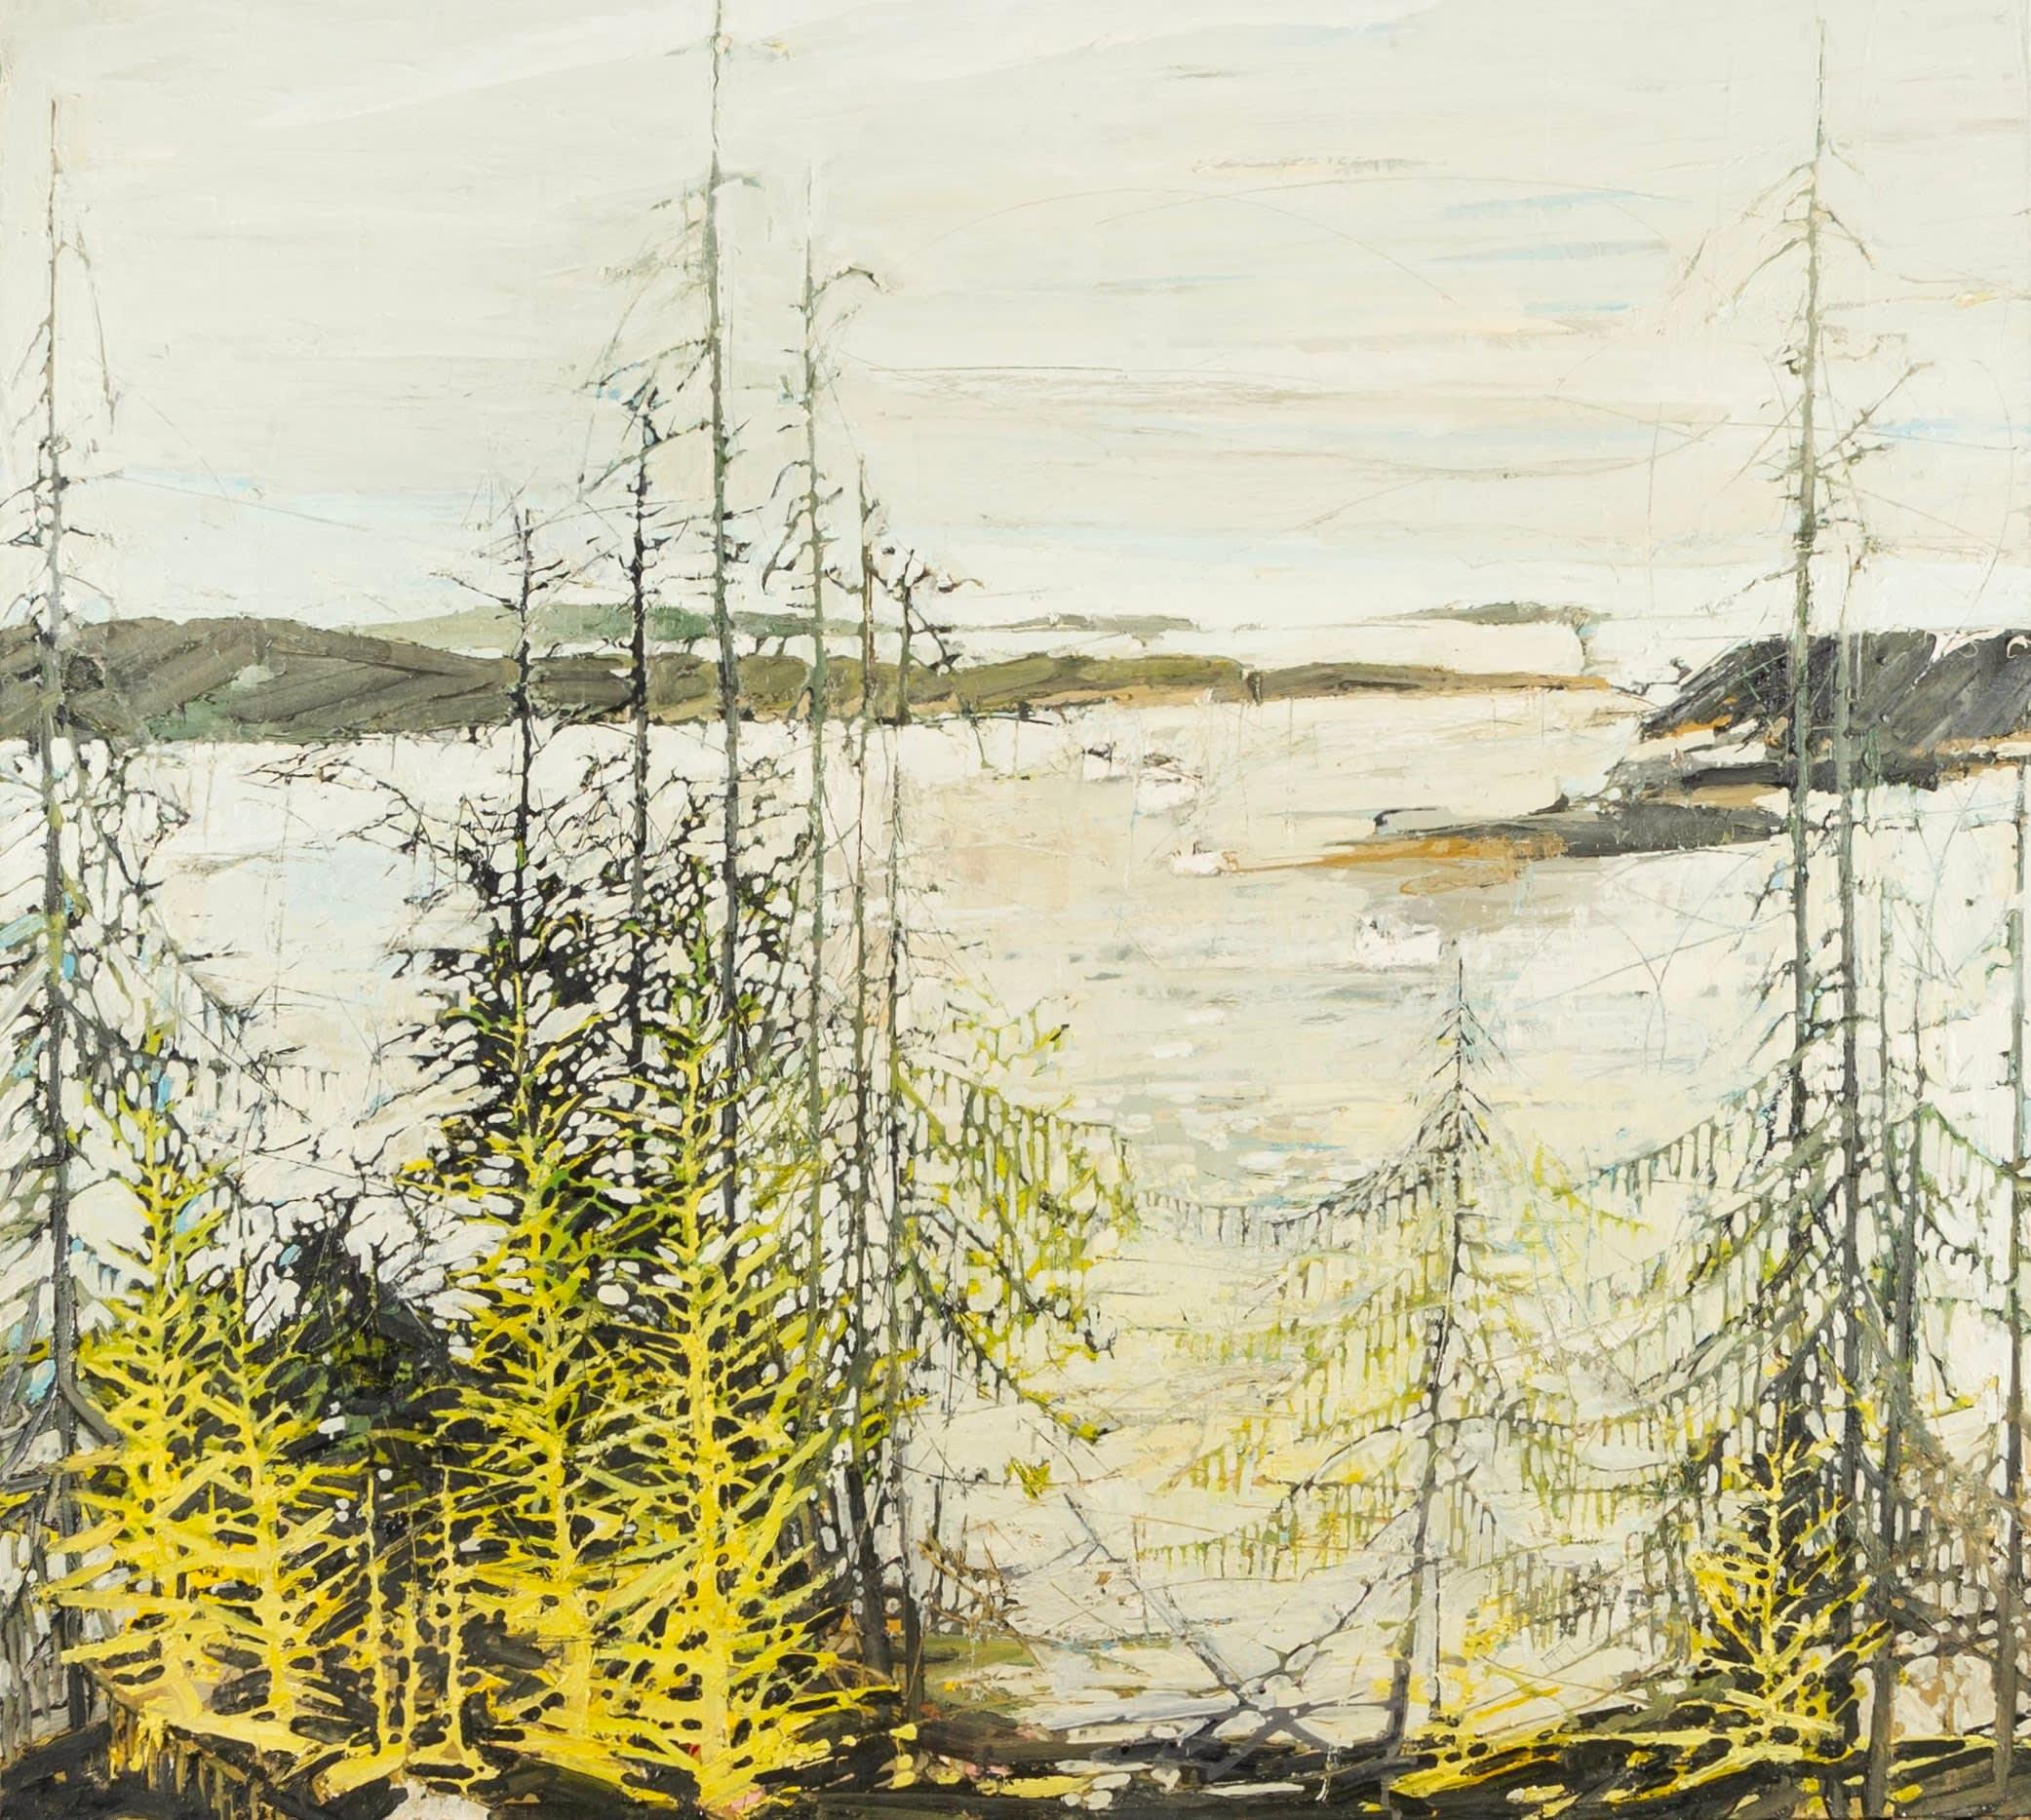 Unknown Landscape Painting - East Coast Drift, Sandlings, Oil on Board Painting by Ffiona Lewis, 2018